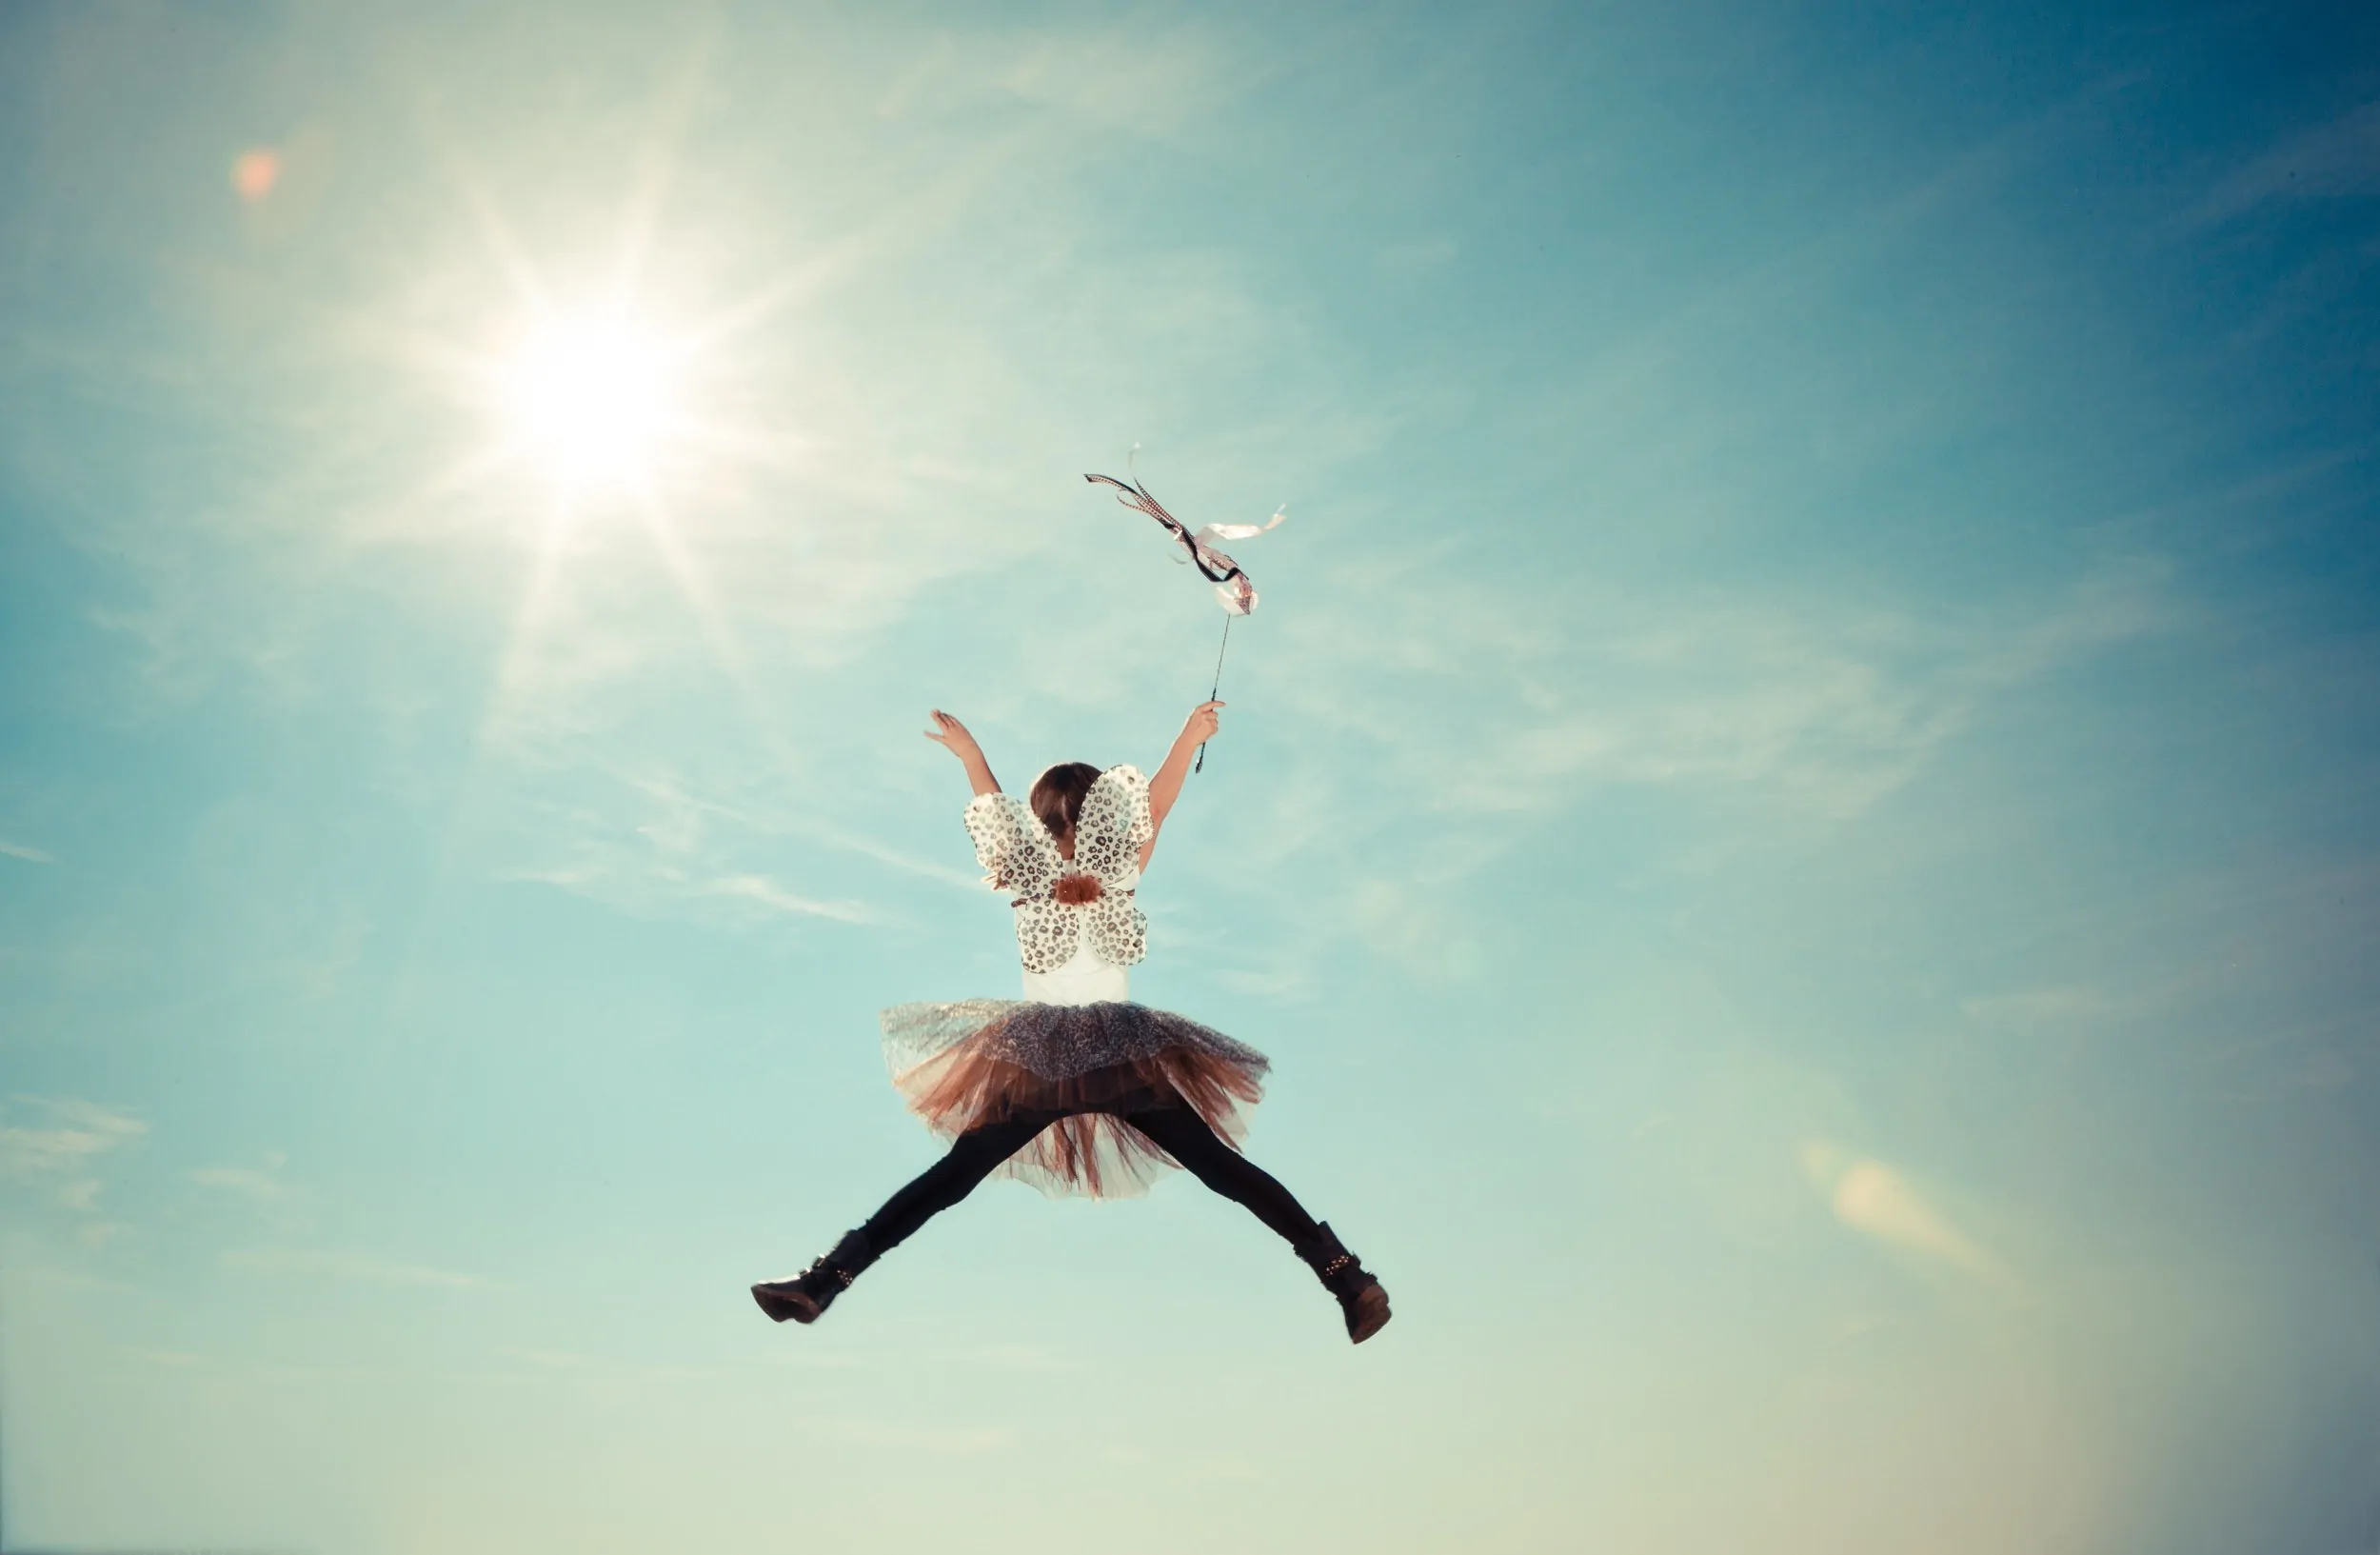 A girl jumping in the air with a kite for a marketing agency campaign.